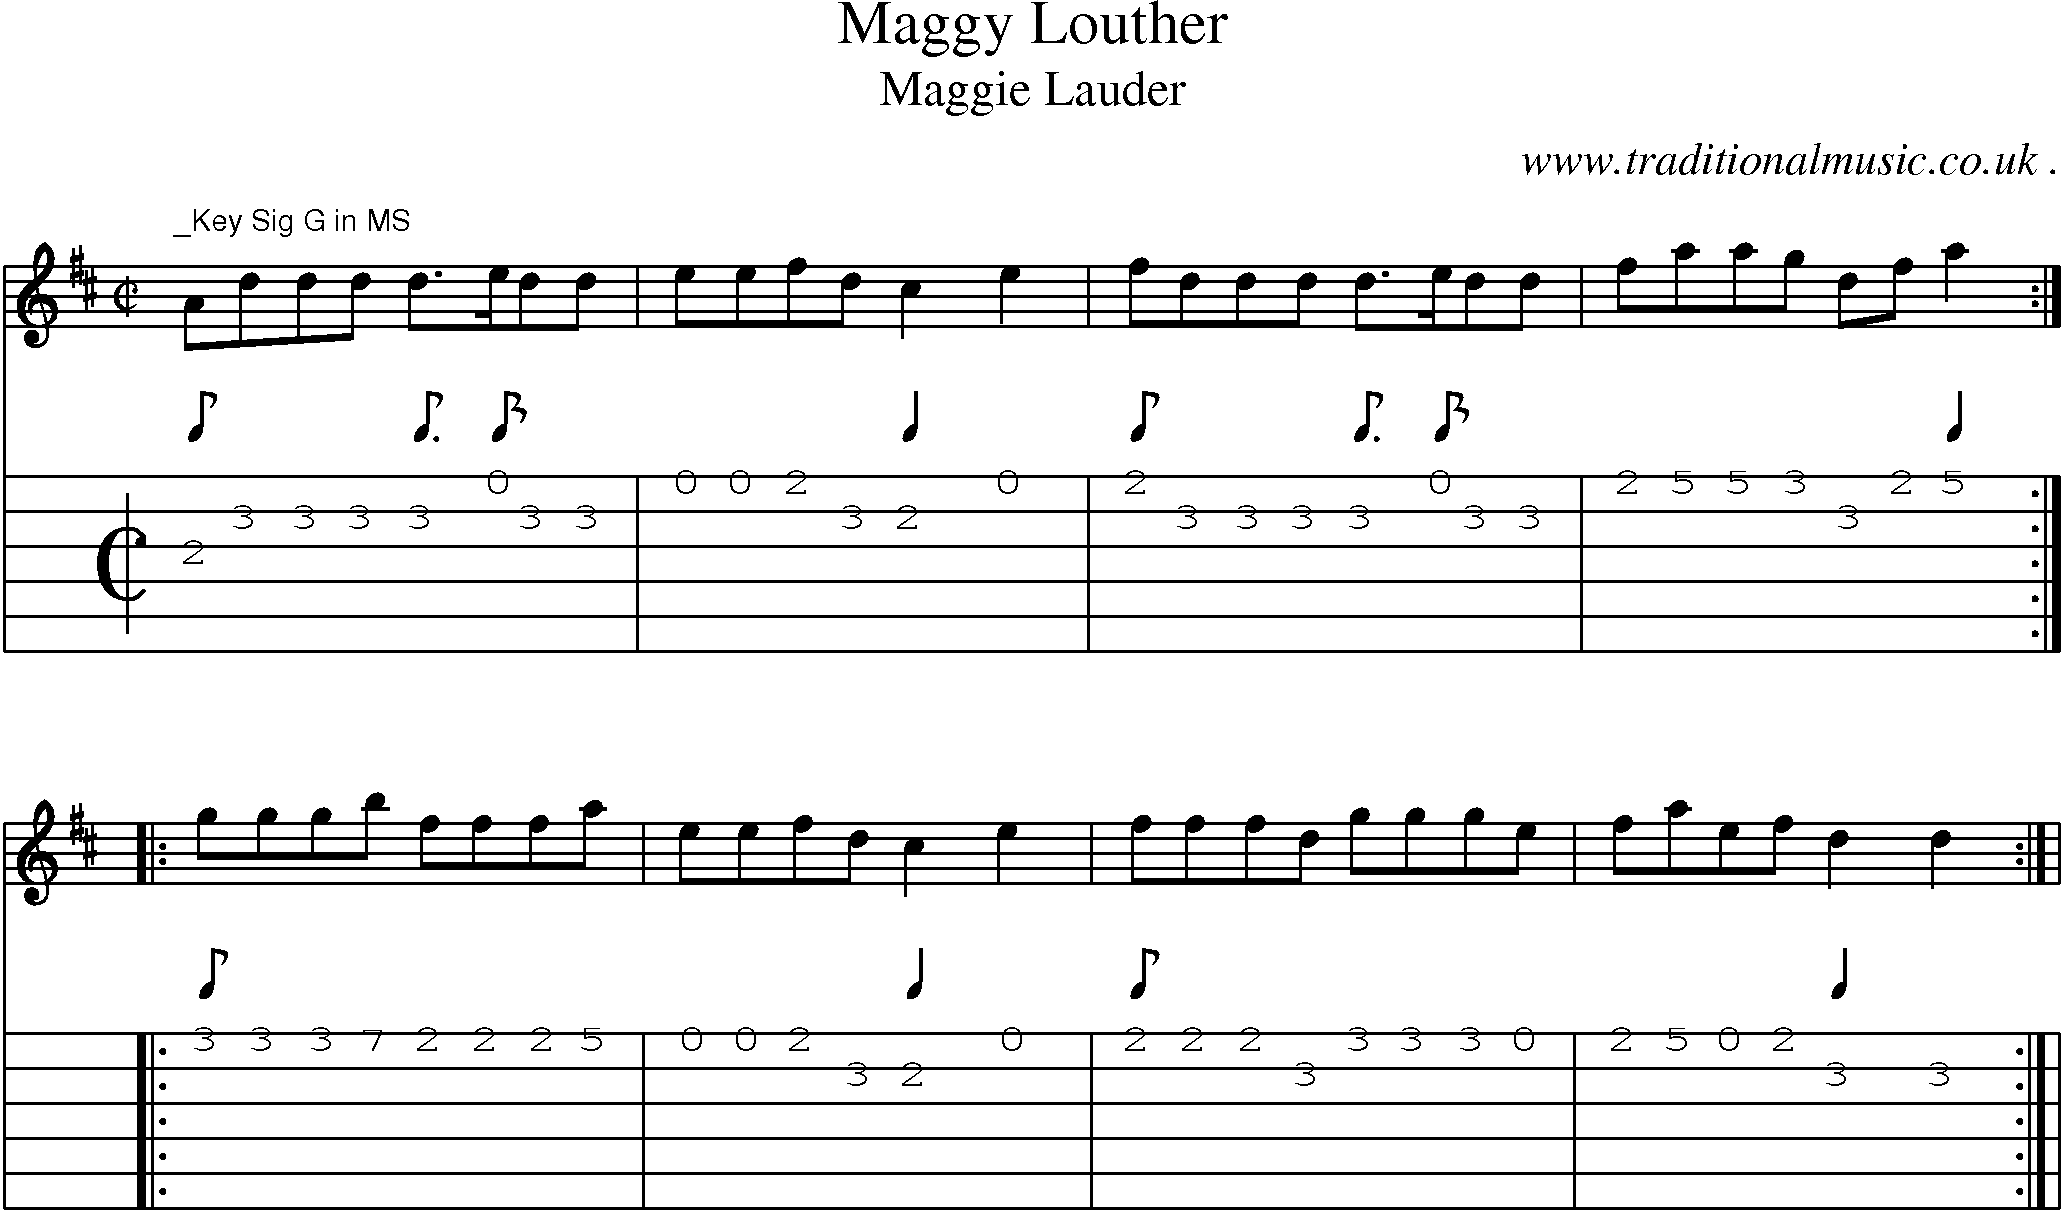 Sheet-Music and Guitar Tabs for Maggy Louther